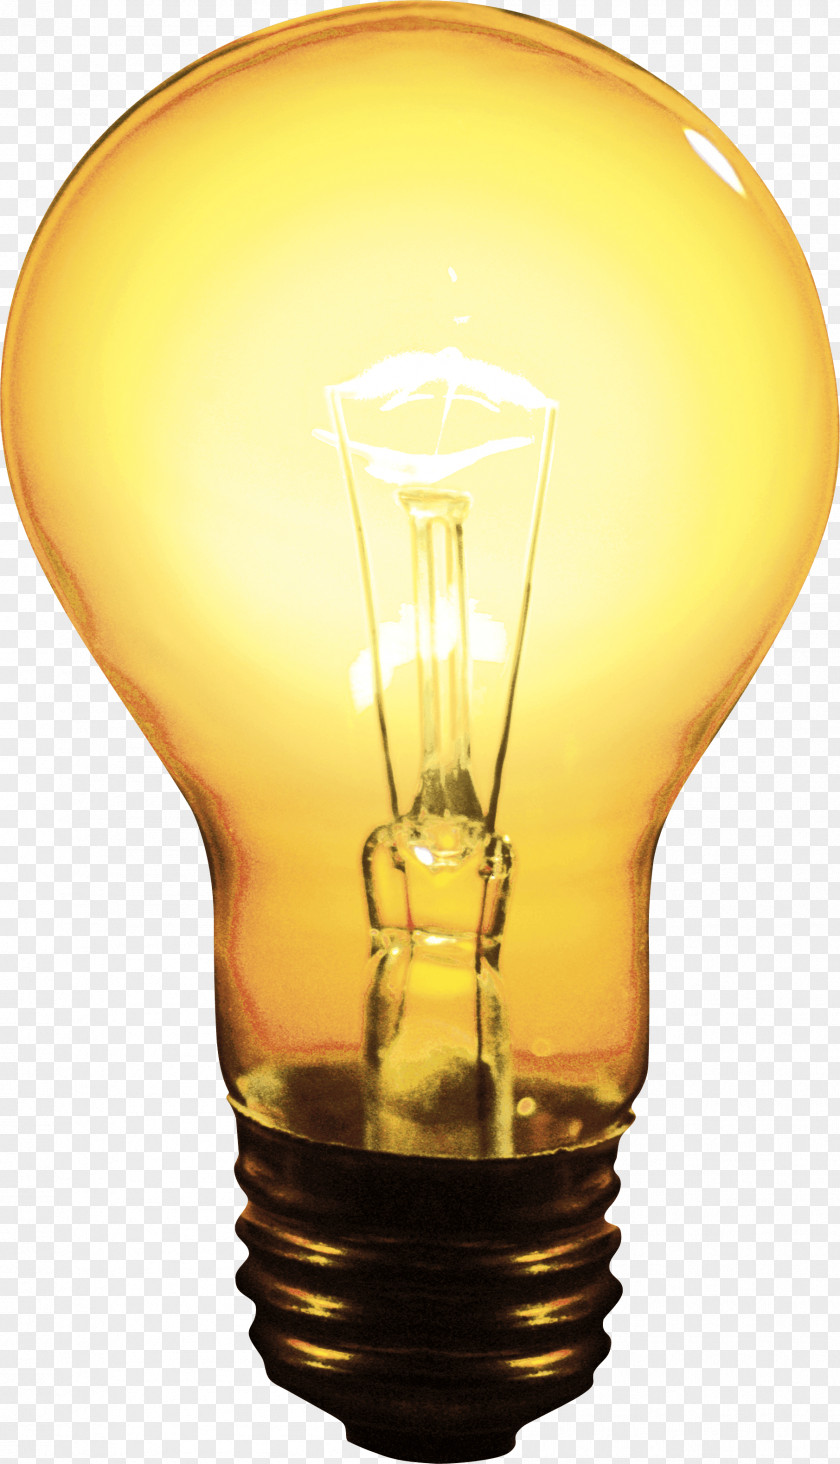 Electric Lamp Image Incandescent Light Bulb PNG